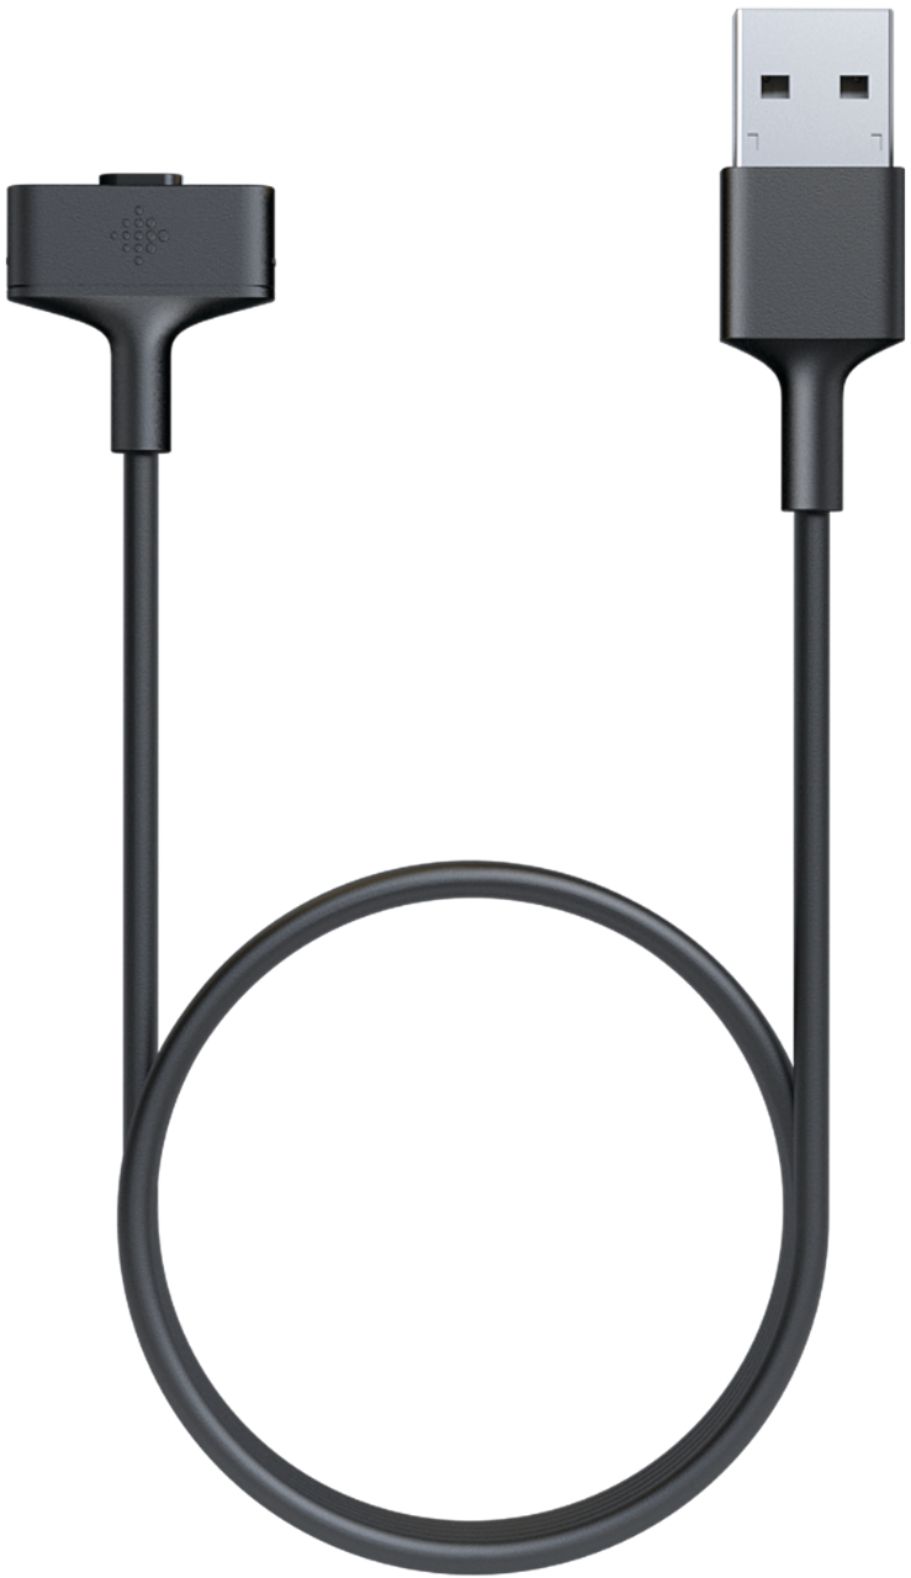 Charging Cable for Fitbit Ionic Black 